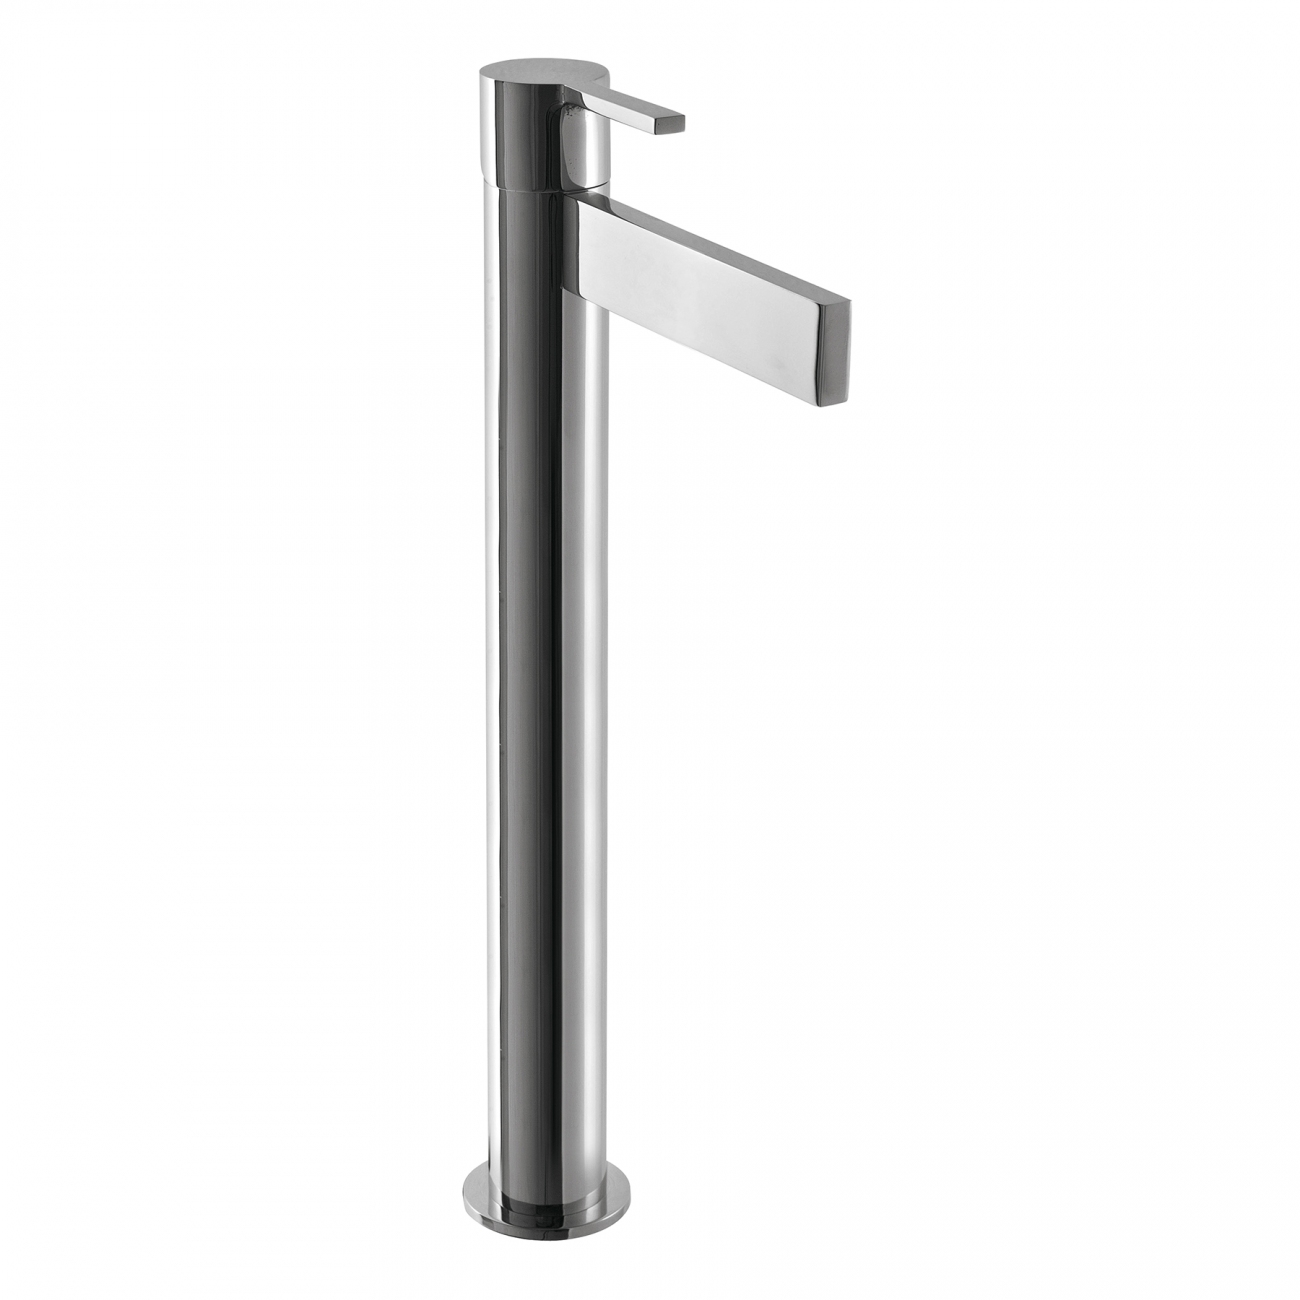 Treemme Time Out high washbasin mixer